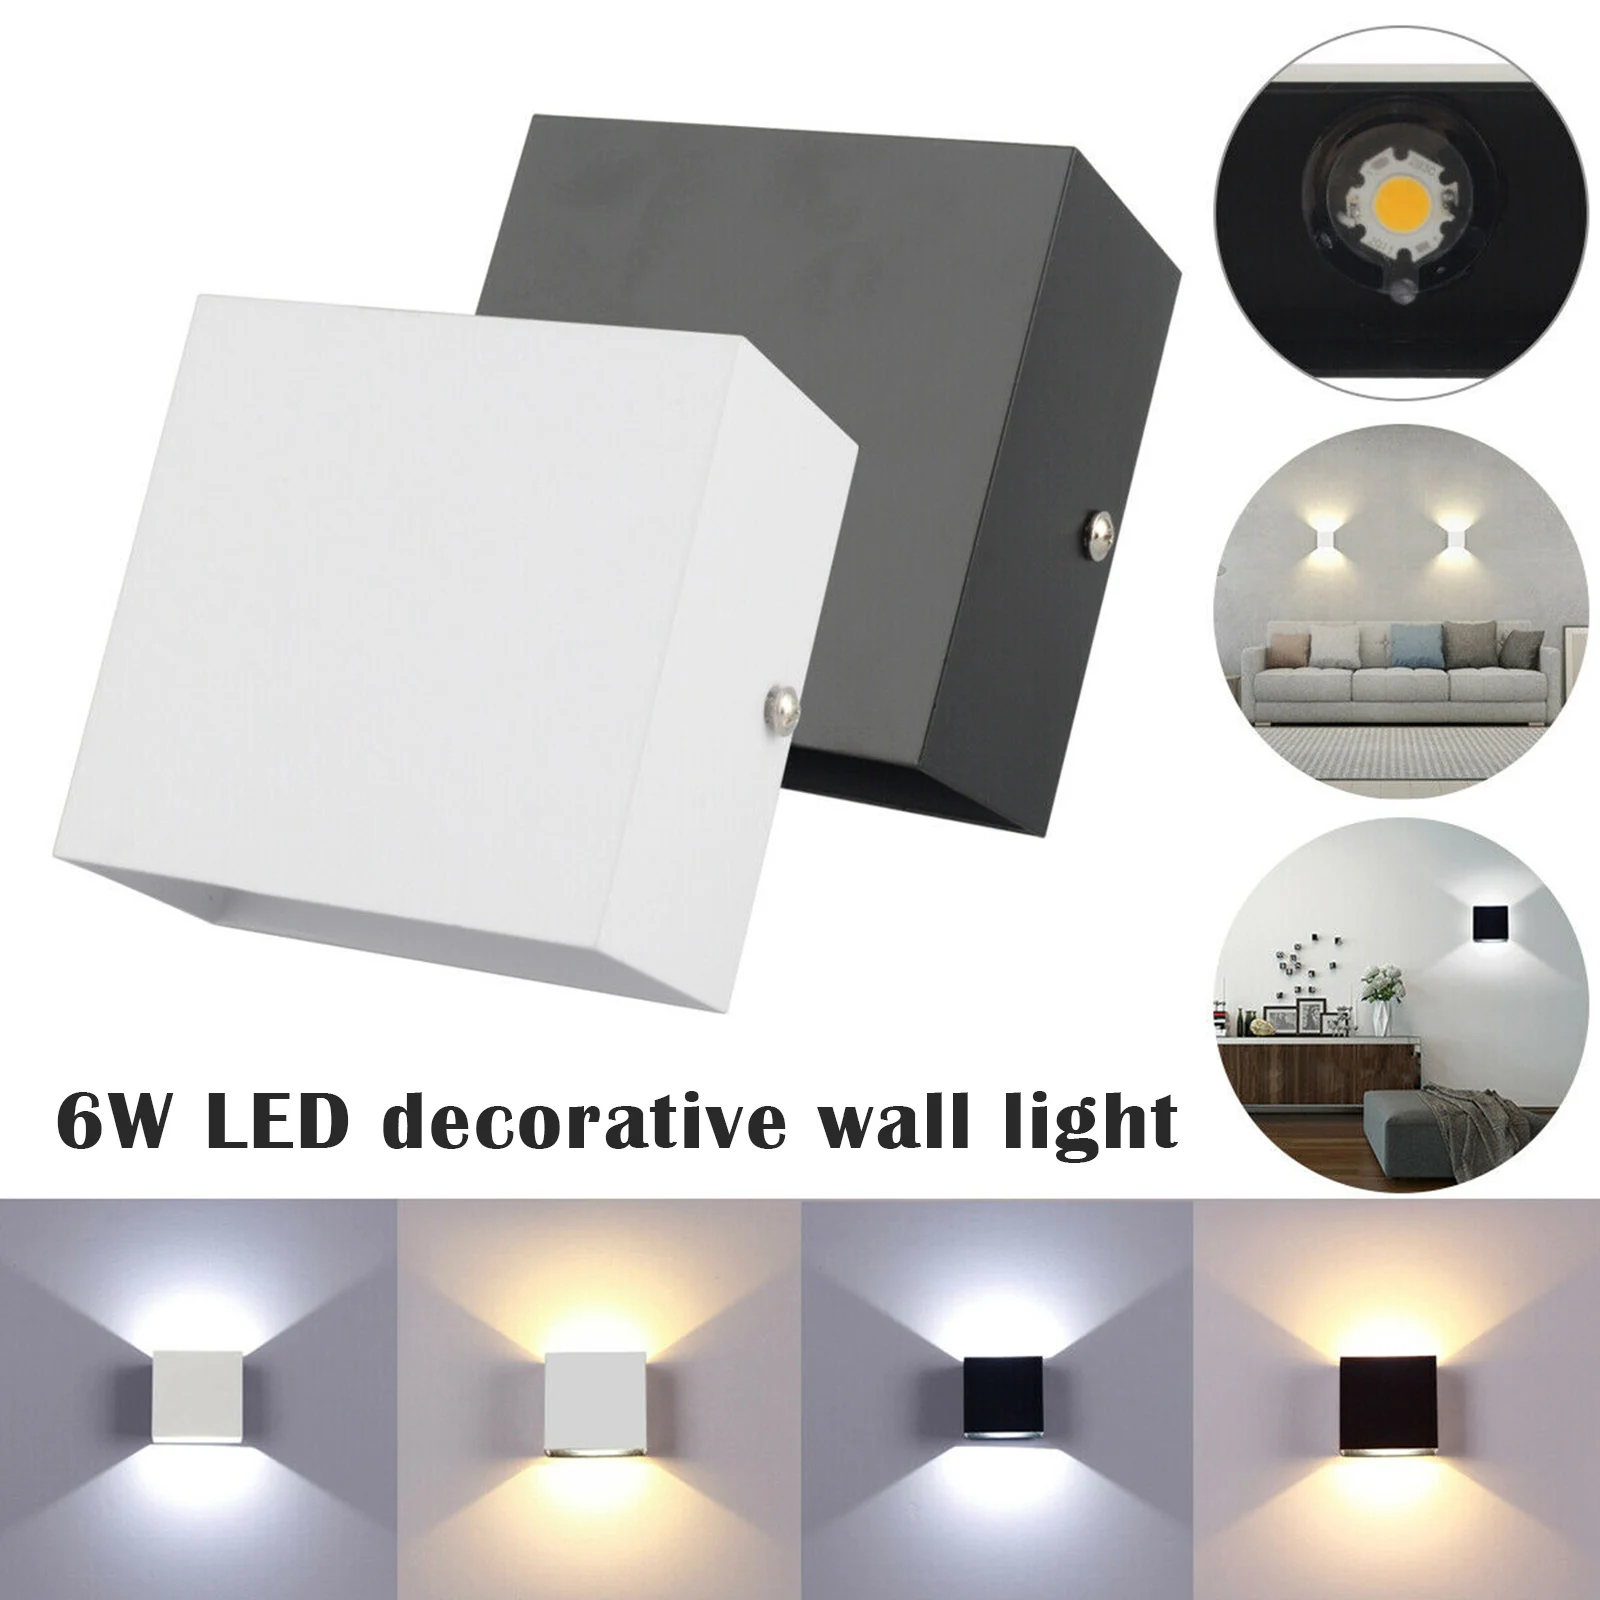 6w Led Wall Lamp Modern Up Down Sconce Lighting Fixture Light Indoor Decoration Bedroom Decoration wall mounted lights